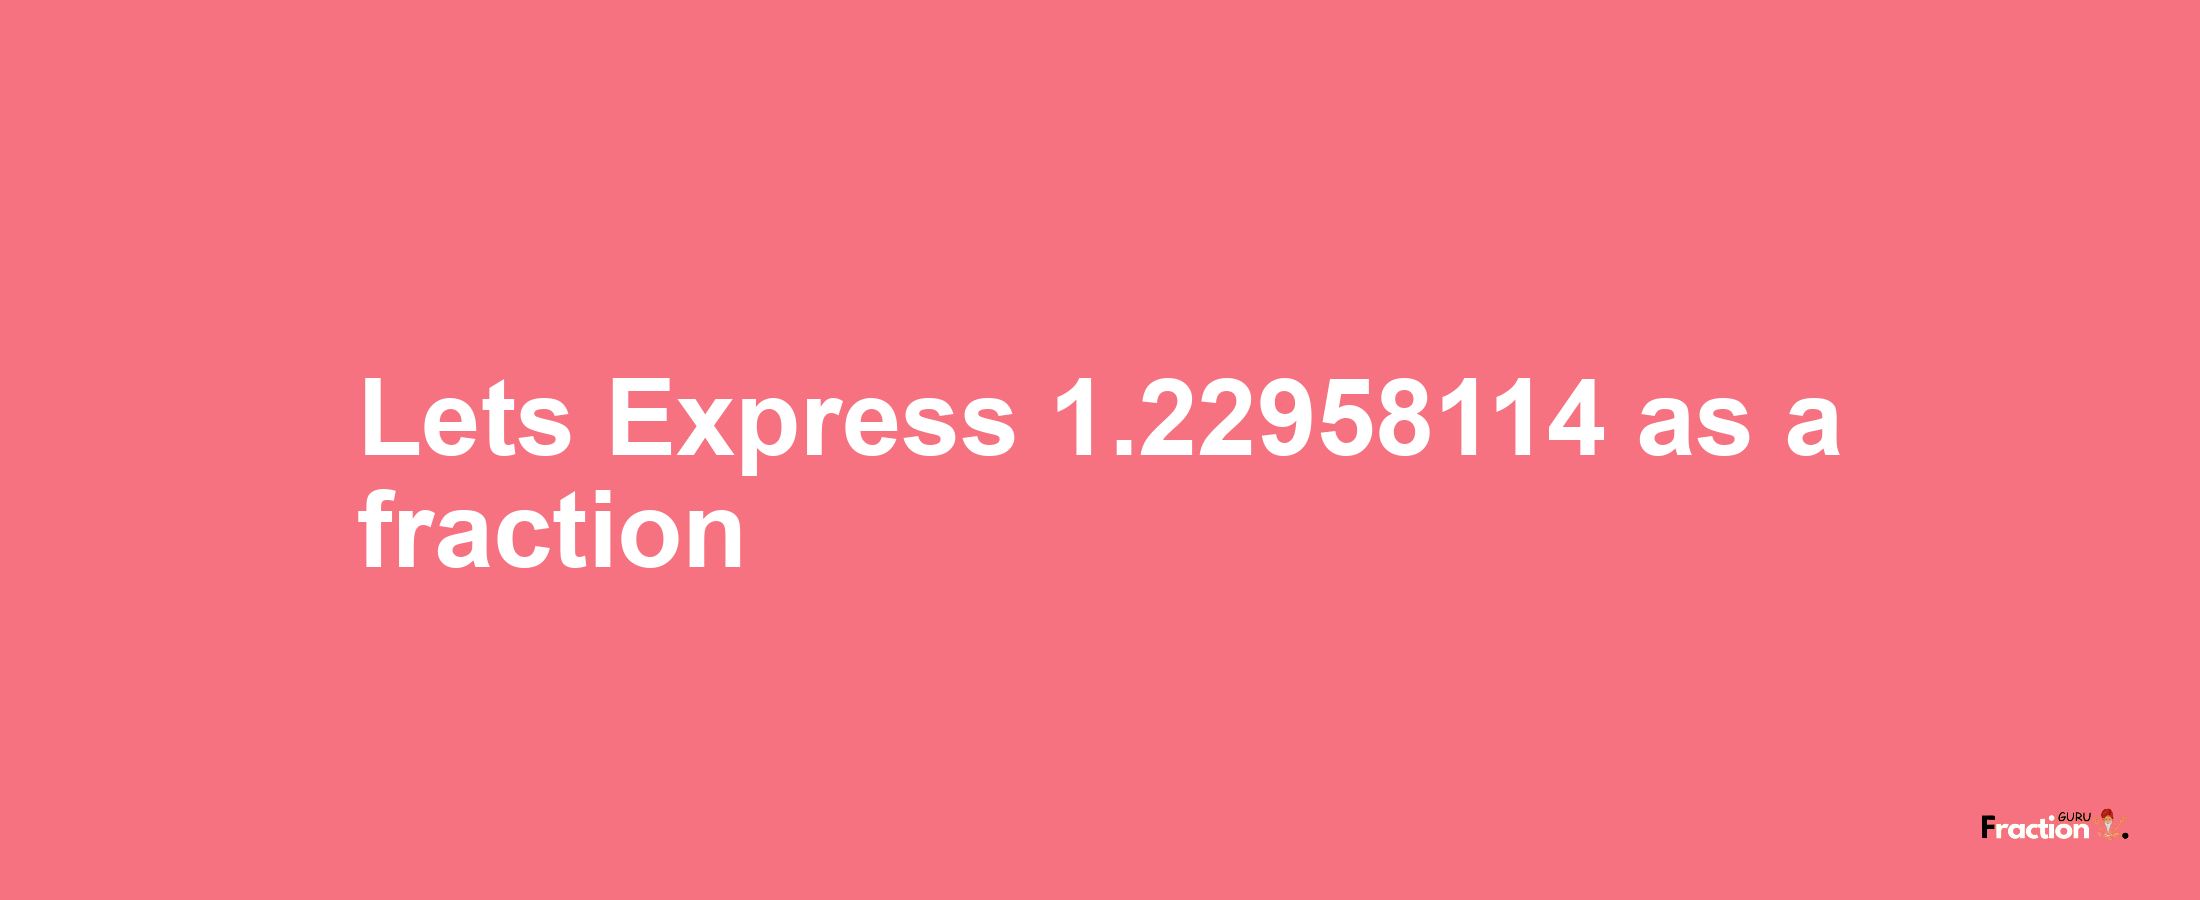 Lets Express 1.22958114 as afraction